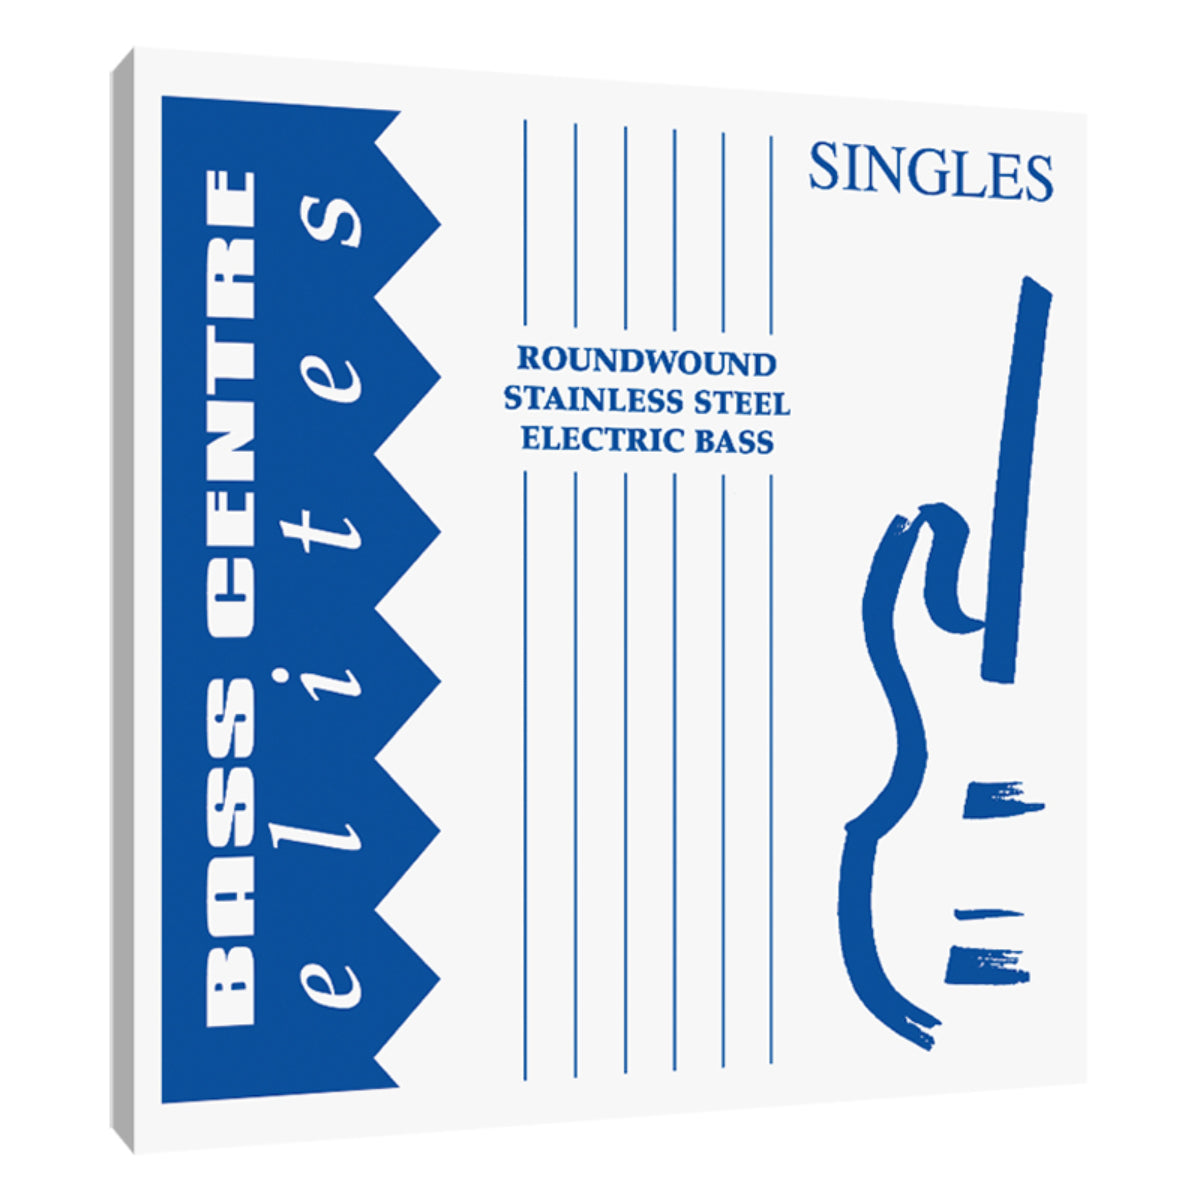 85 Stainless Steel Single Bass String